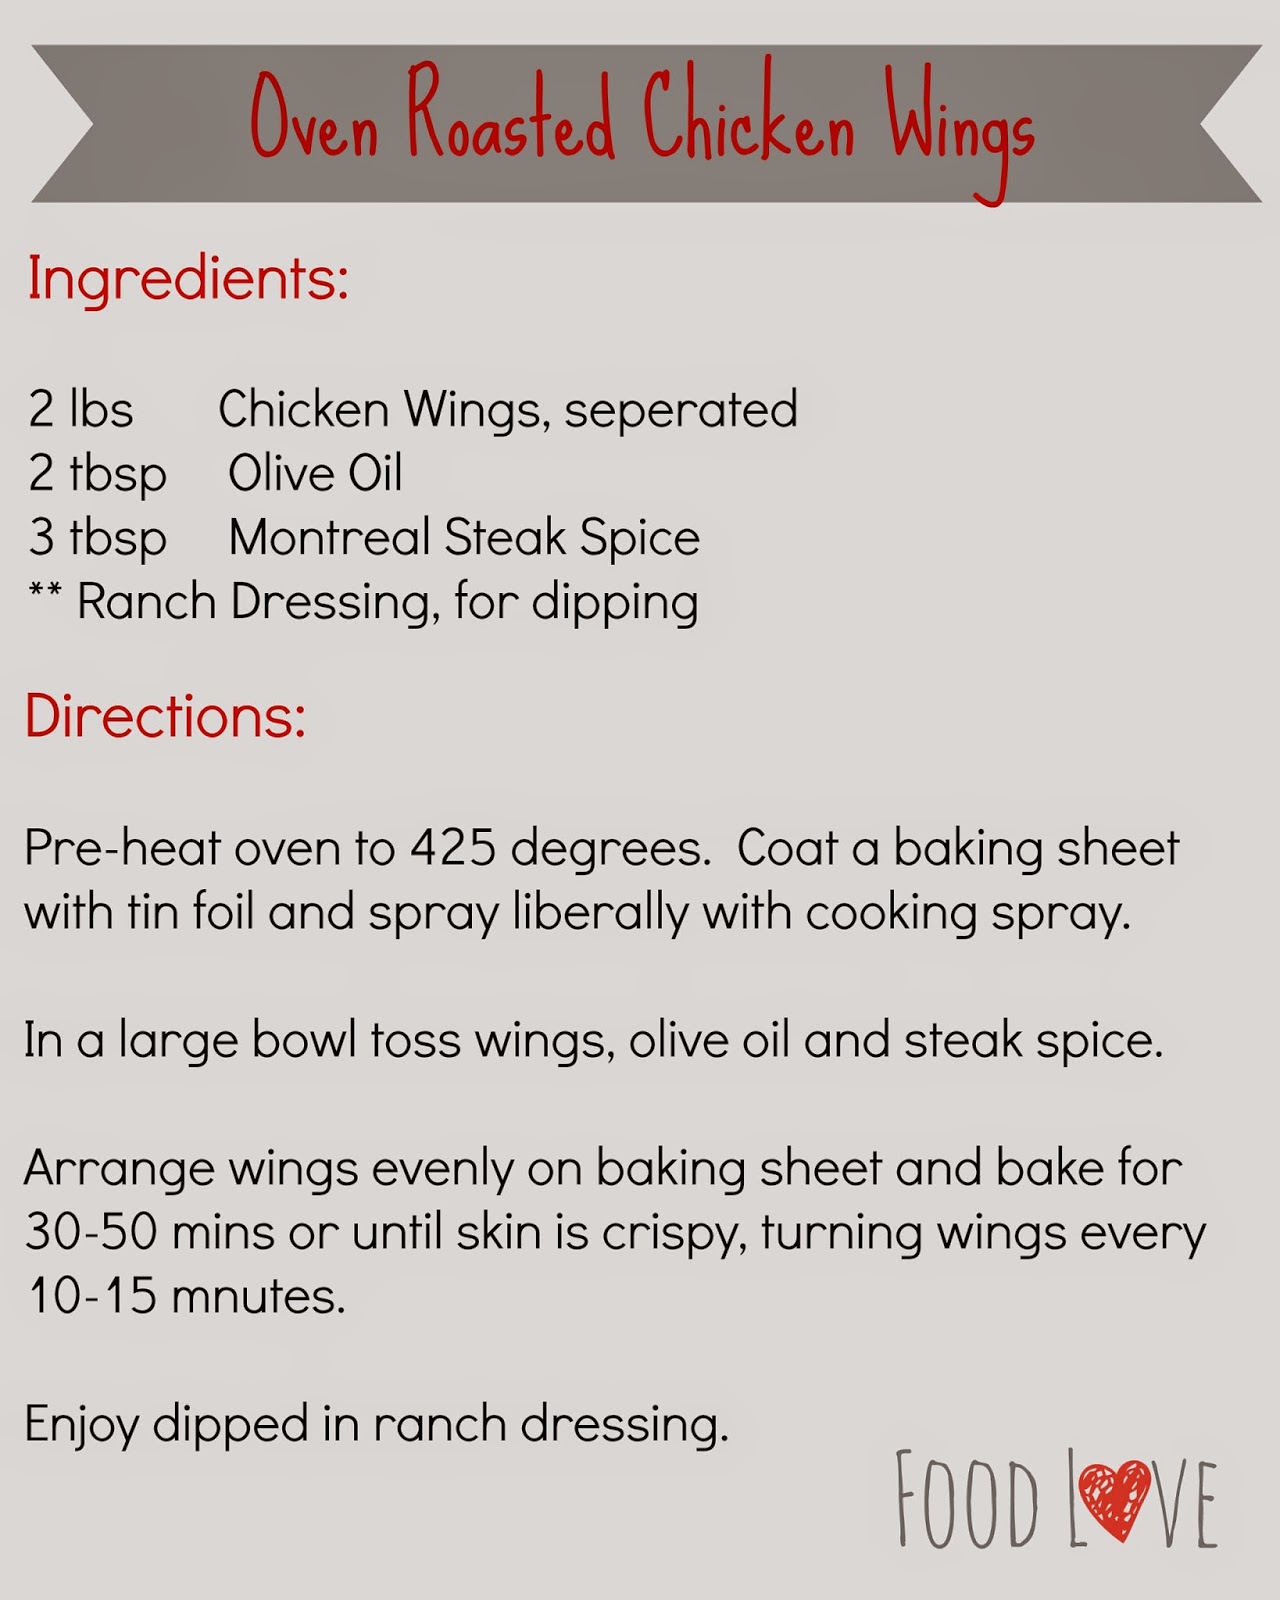 Food Love: Oven Roasted Chicken Wings